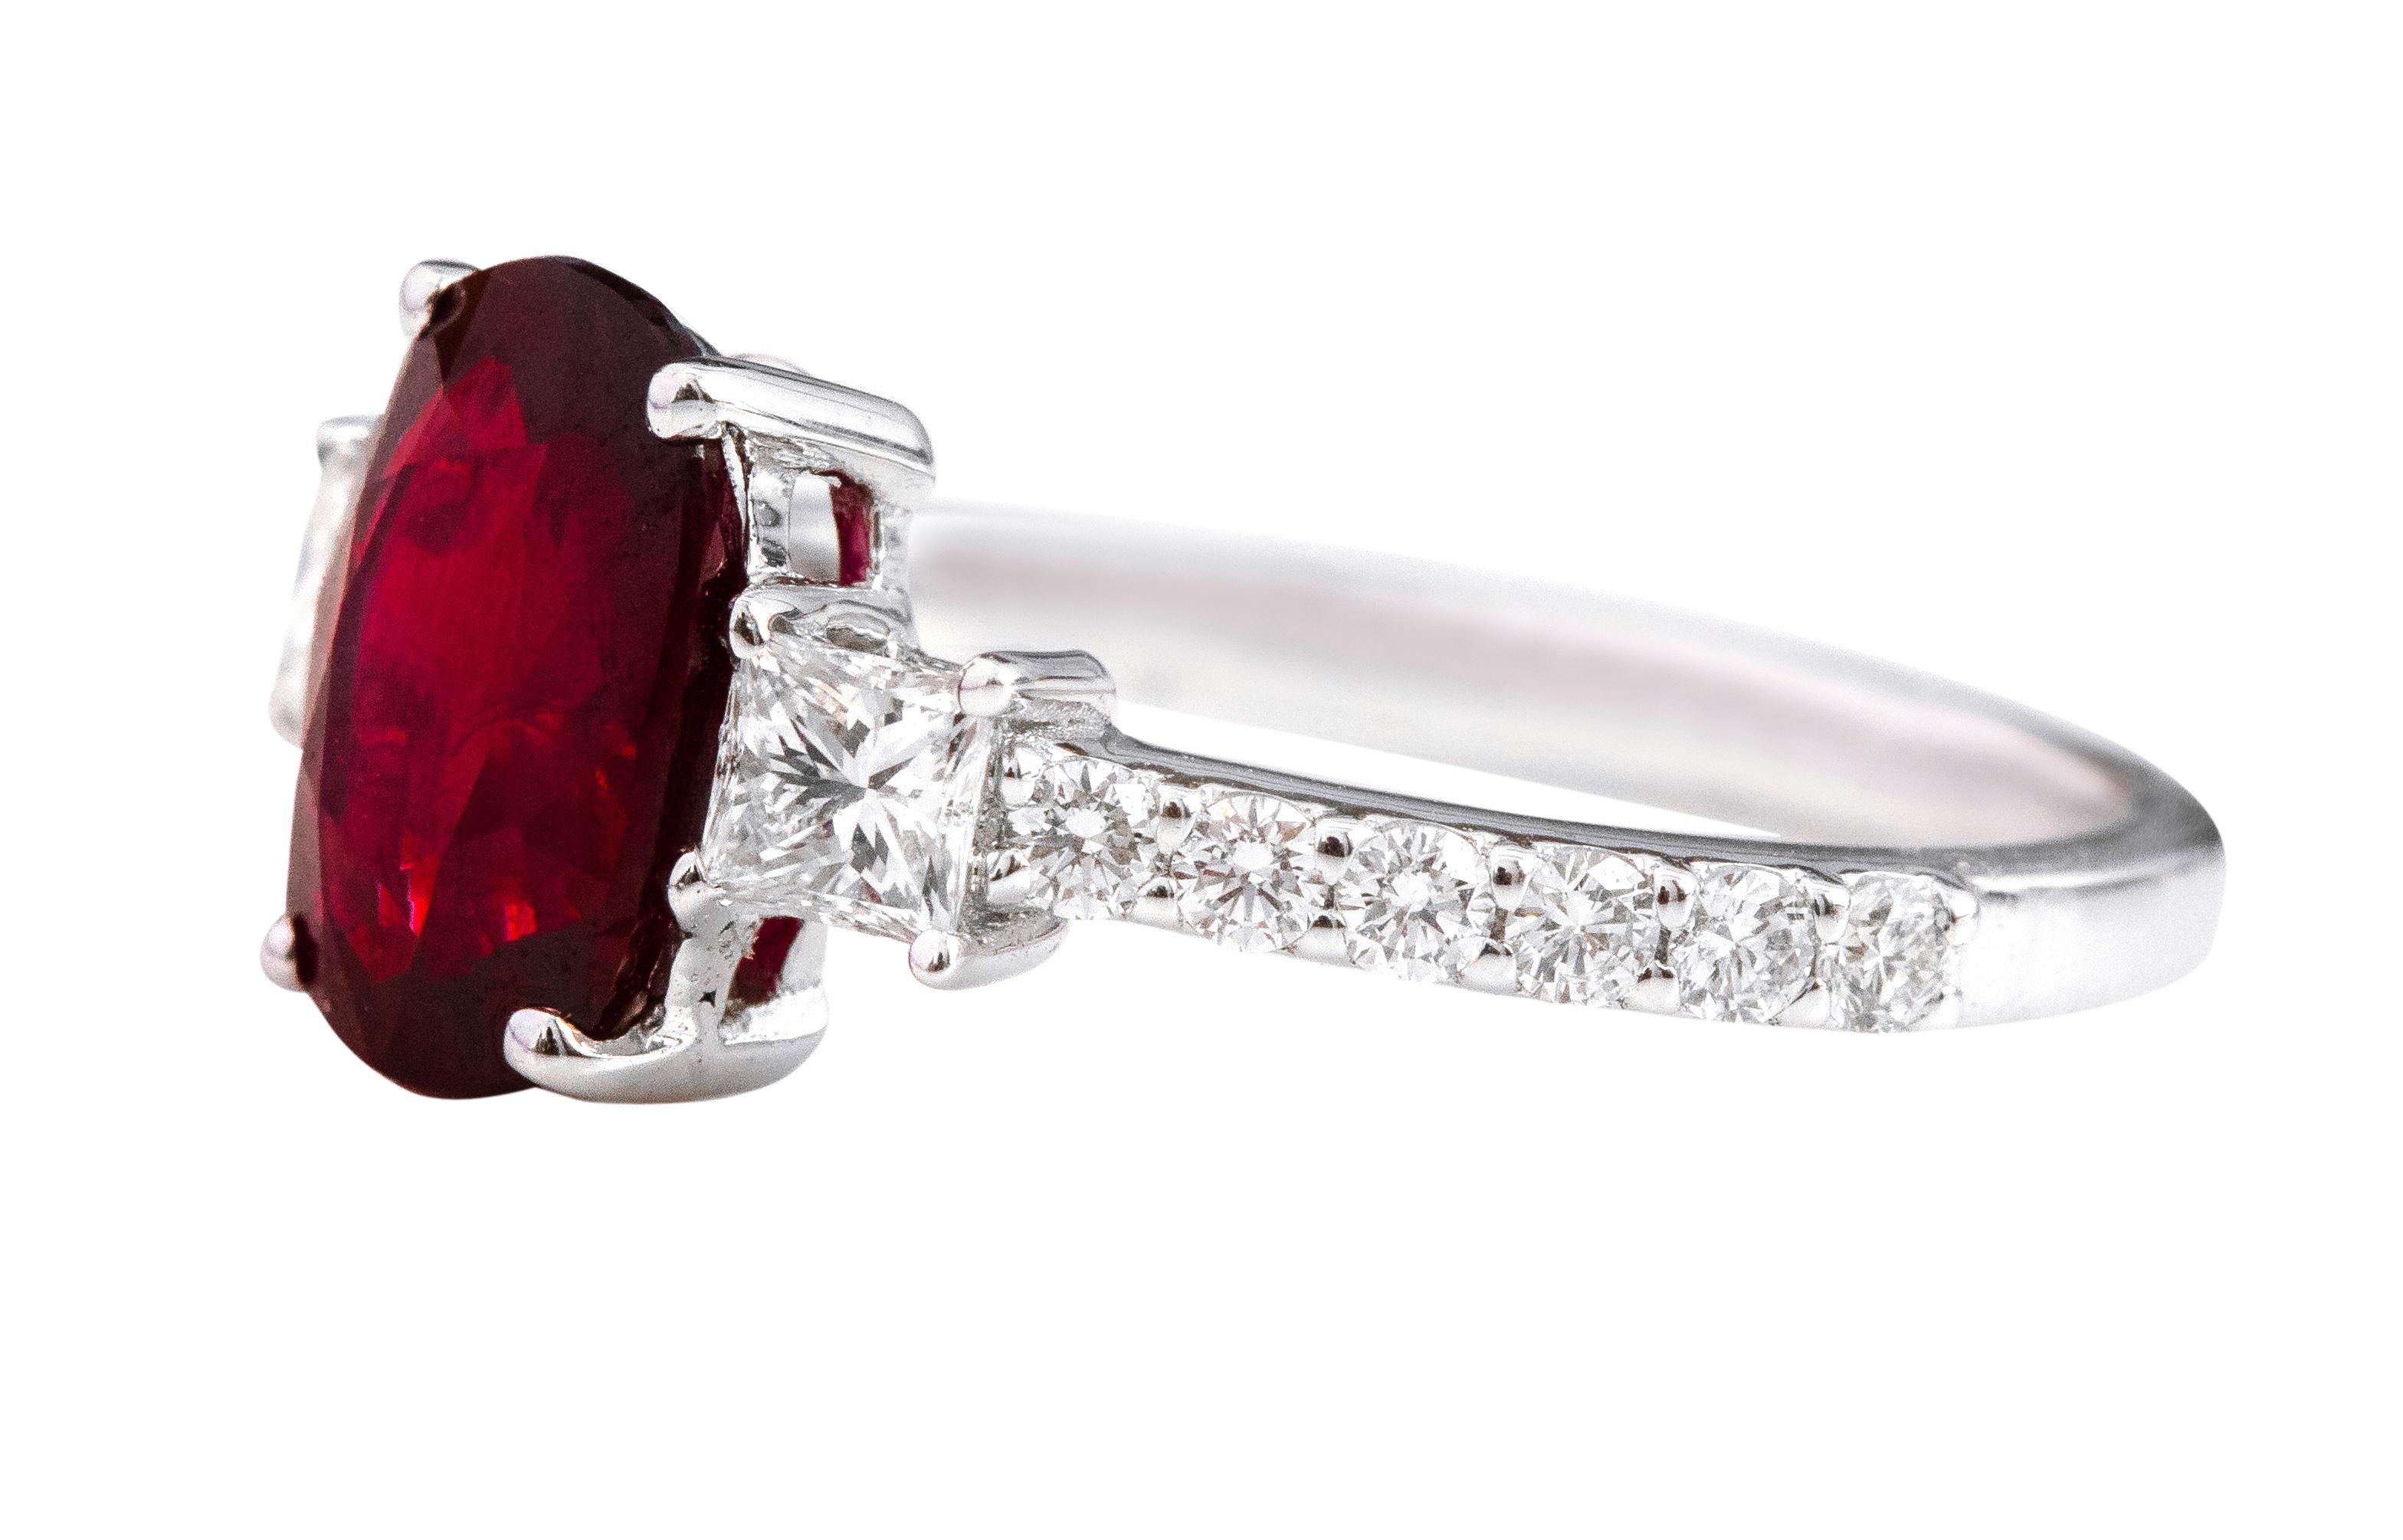 18 Karat White Gold 2.14 Carat Oval-Cut Ruby and Diamond Three-Stone Ring

This exceptional crimson red ruby and diamond trinity ring is impressive. The three-stone trinity ring tells a story by not only representing the said “past, present, and